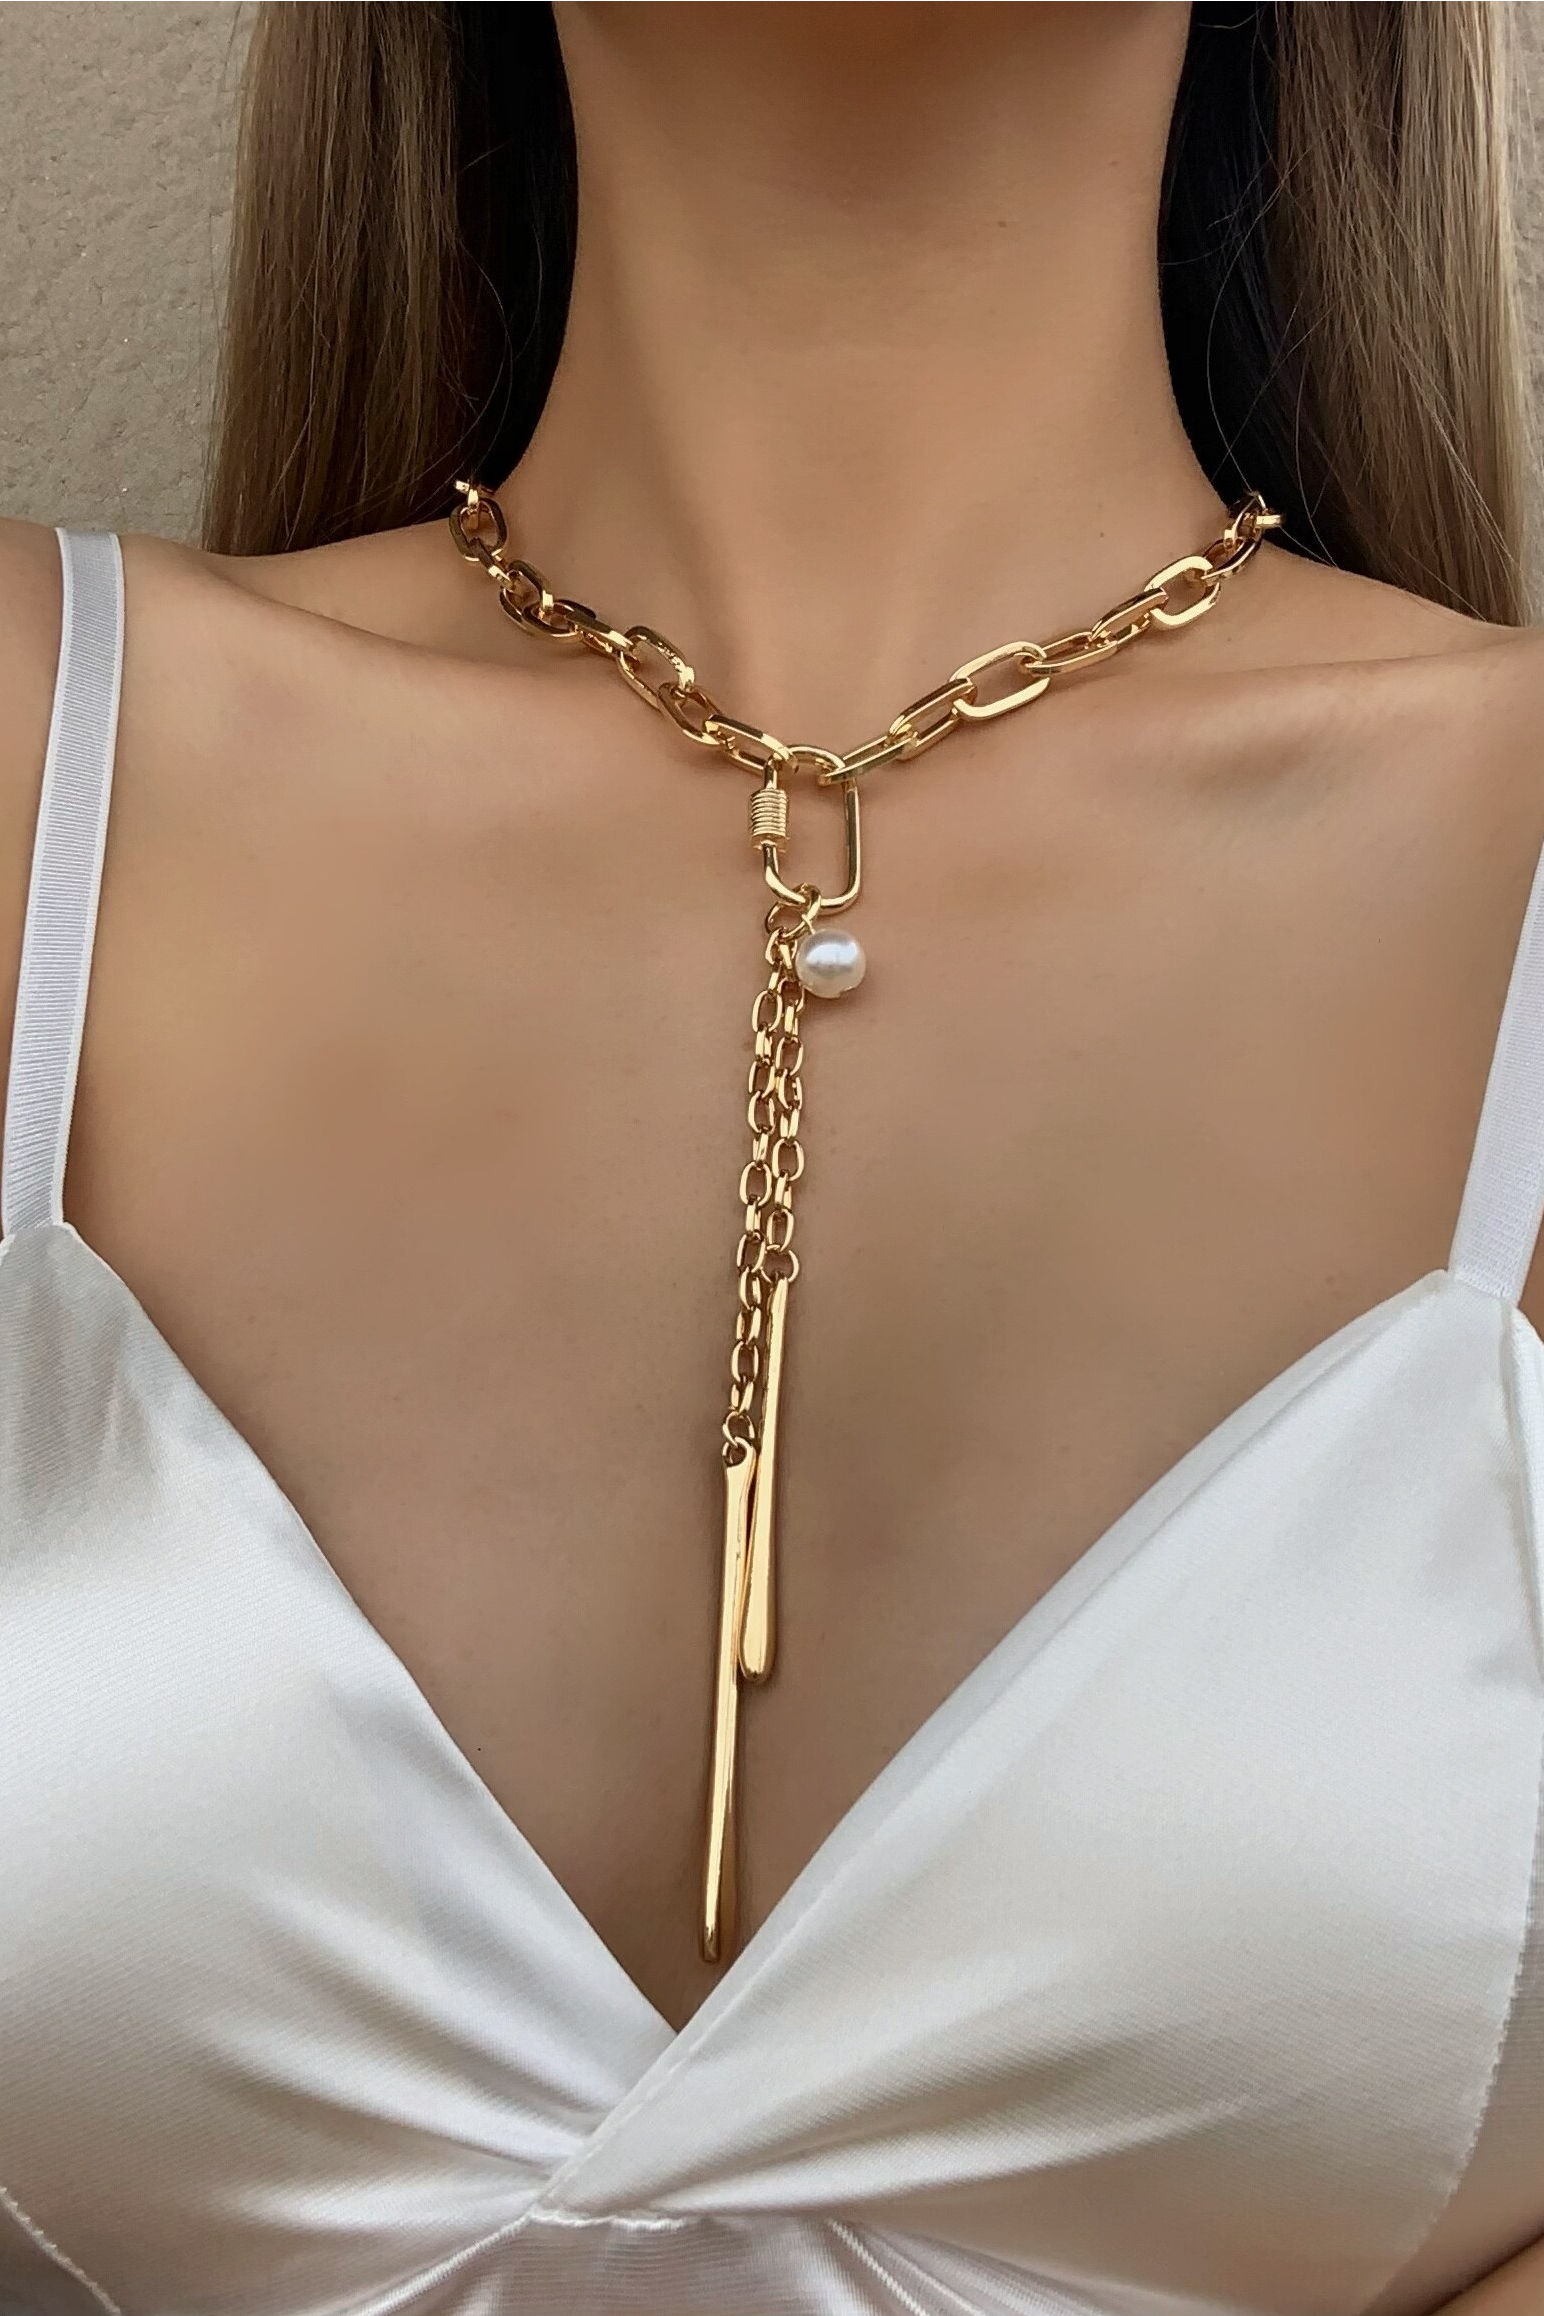 Fleepmart Gold Color Chain Necklace For Women New Design Pearl Metal Long Chain Geometric